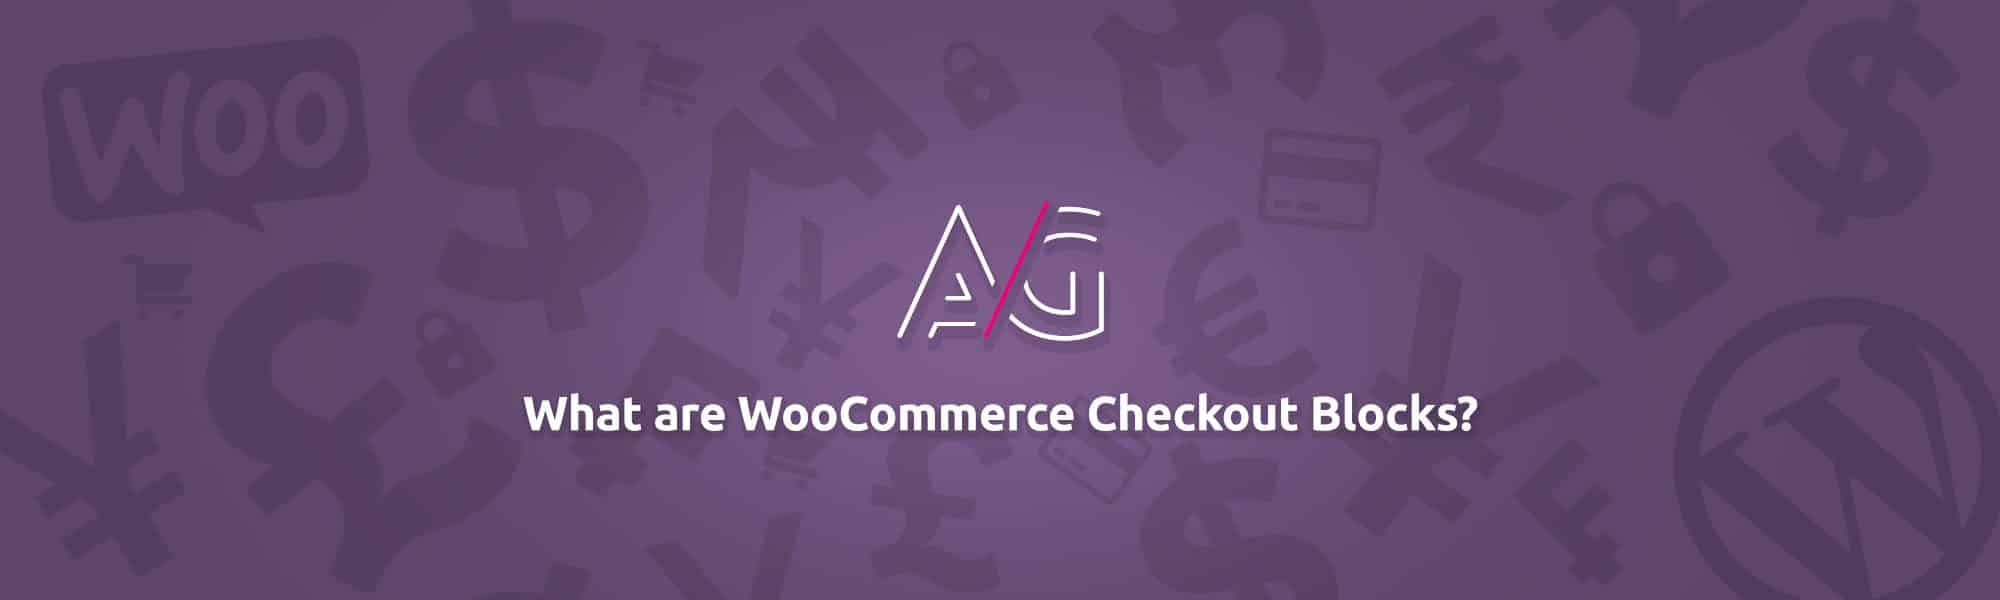 How to Use the WooCommerce Checkout Block